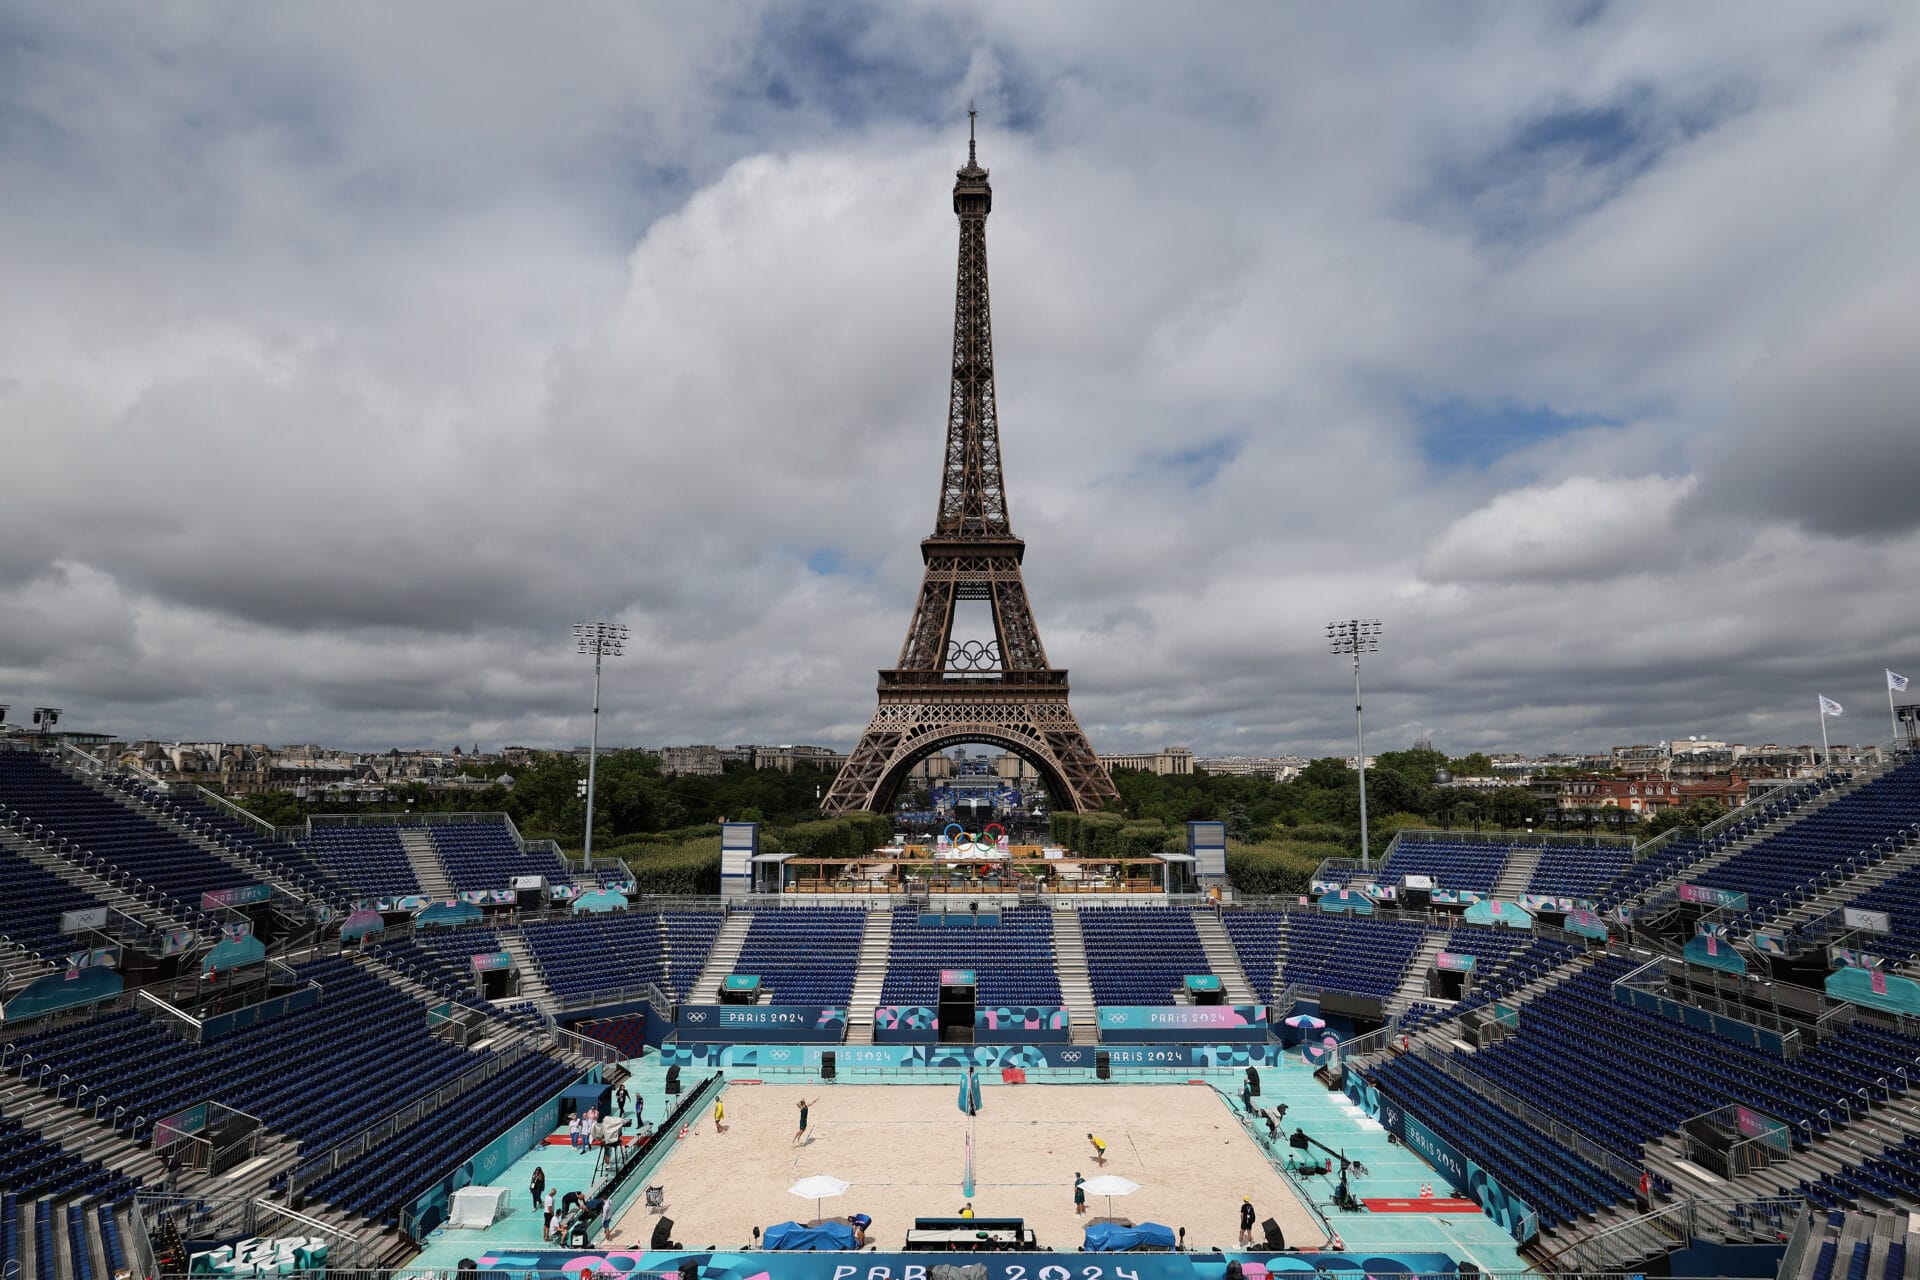 A general view of the Beach Volleyball venue at Jardin de la Tour Eiffel ahead of the Paris Olympics Games on July 23, 2024 in Paris, France. The city is preparing to host the XXXIII Olympic Summer Games from July 26 to August 11. (Photo by Cameron Spencer/Getty Images)